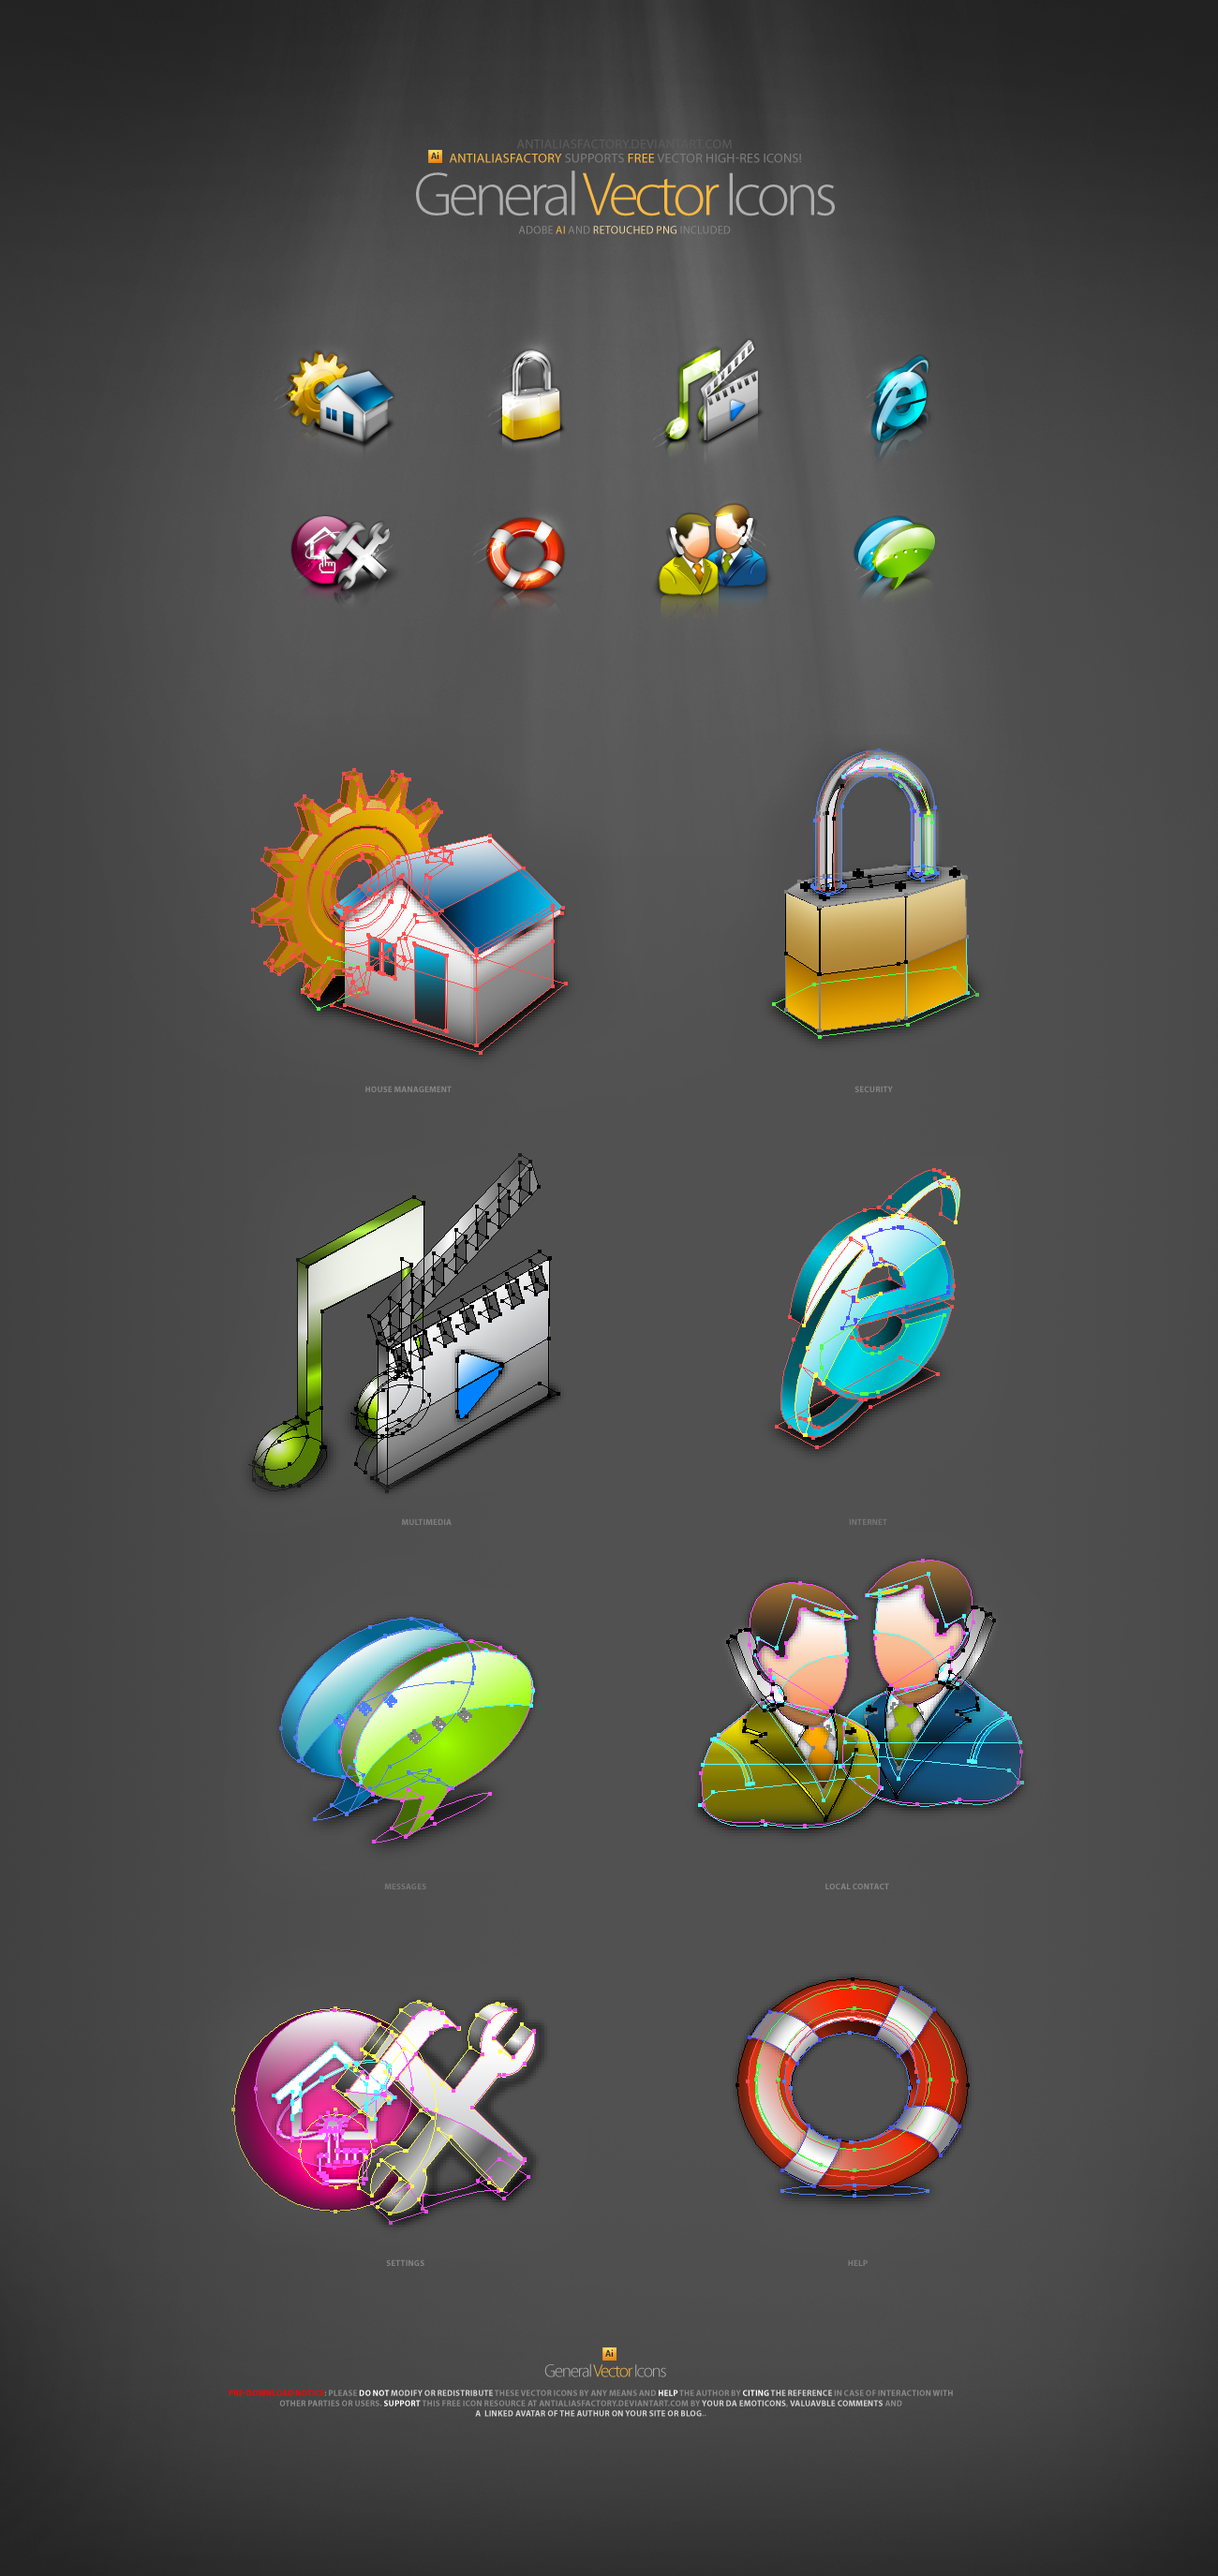 General Vector Icons